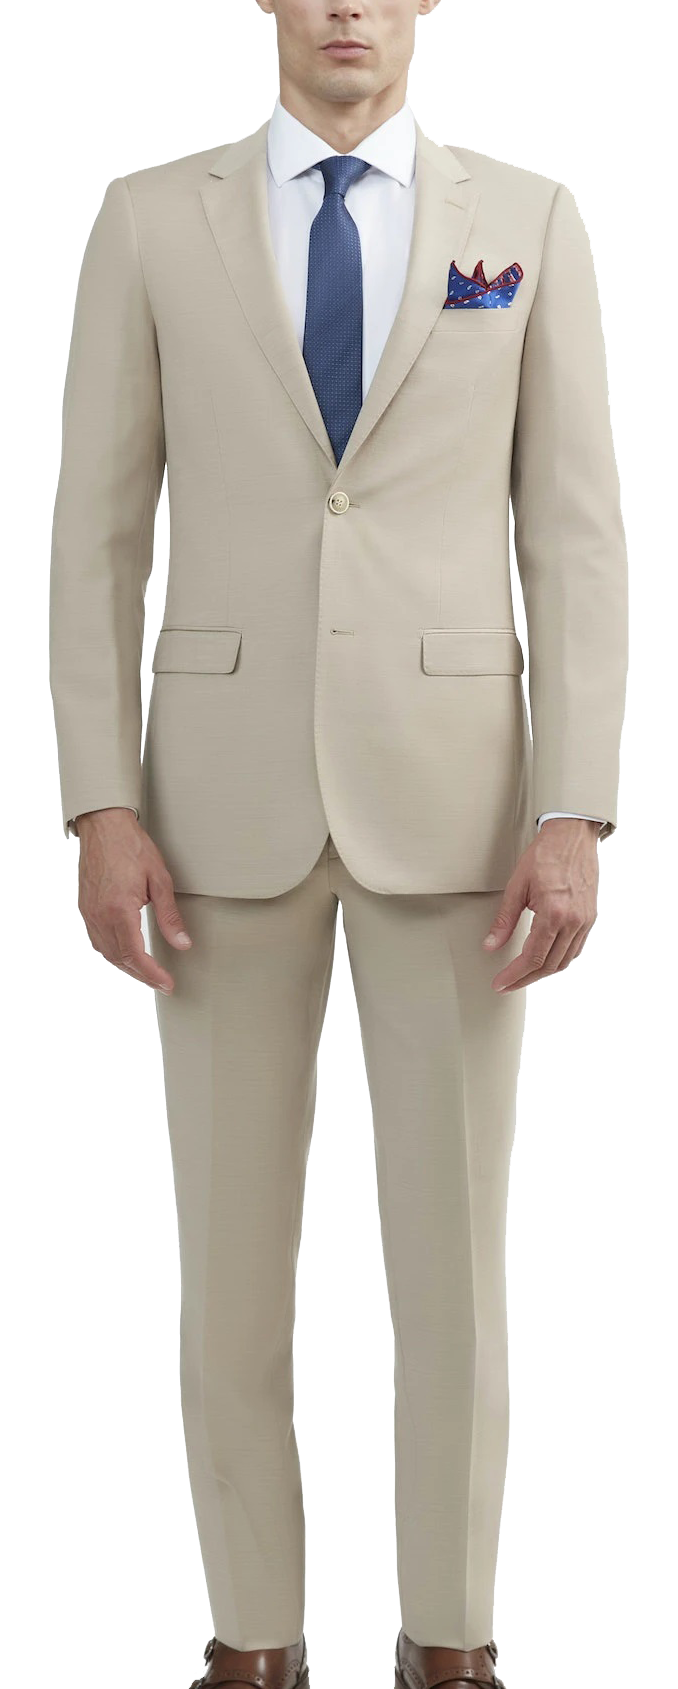 Beige suit made of Italian wool by Tomasso Black